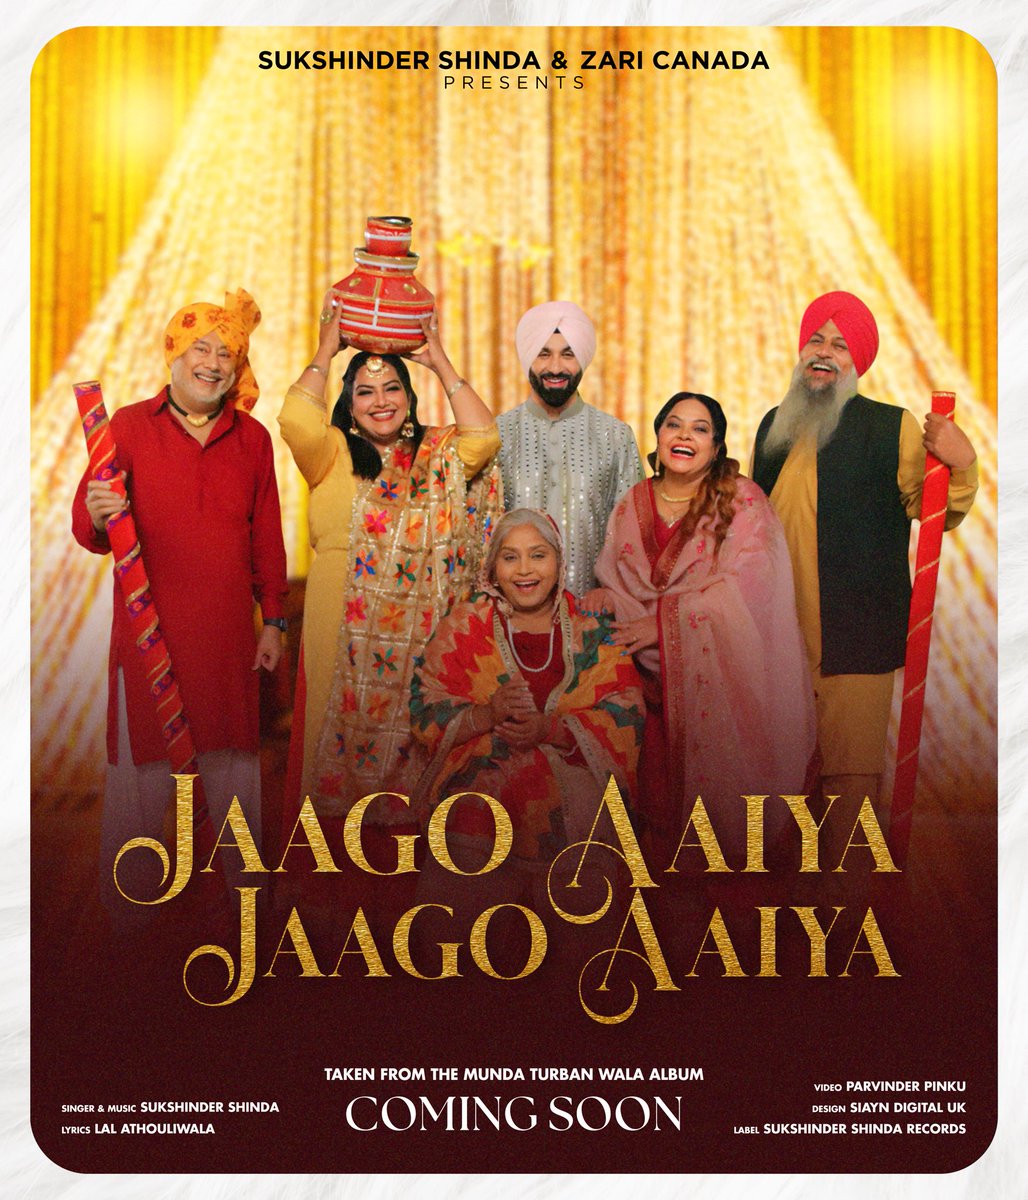 Releasing 31 May 2023 Sukshinder Shinda’s Jaago Aayia Jaago Aayia from the Album Munda Turban Wala. Wake UP! It’s Jagoo time! Wedding season is upon us and here’s my very special Jaago Aayia Jaago Aayia song for everyone who is ready to dance, sing and make the wedding party an…